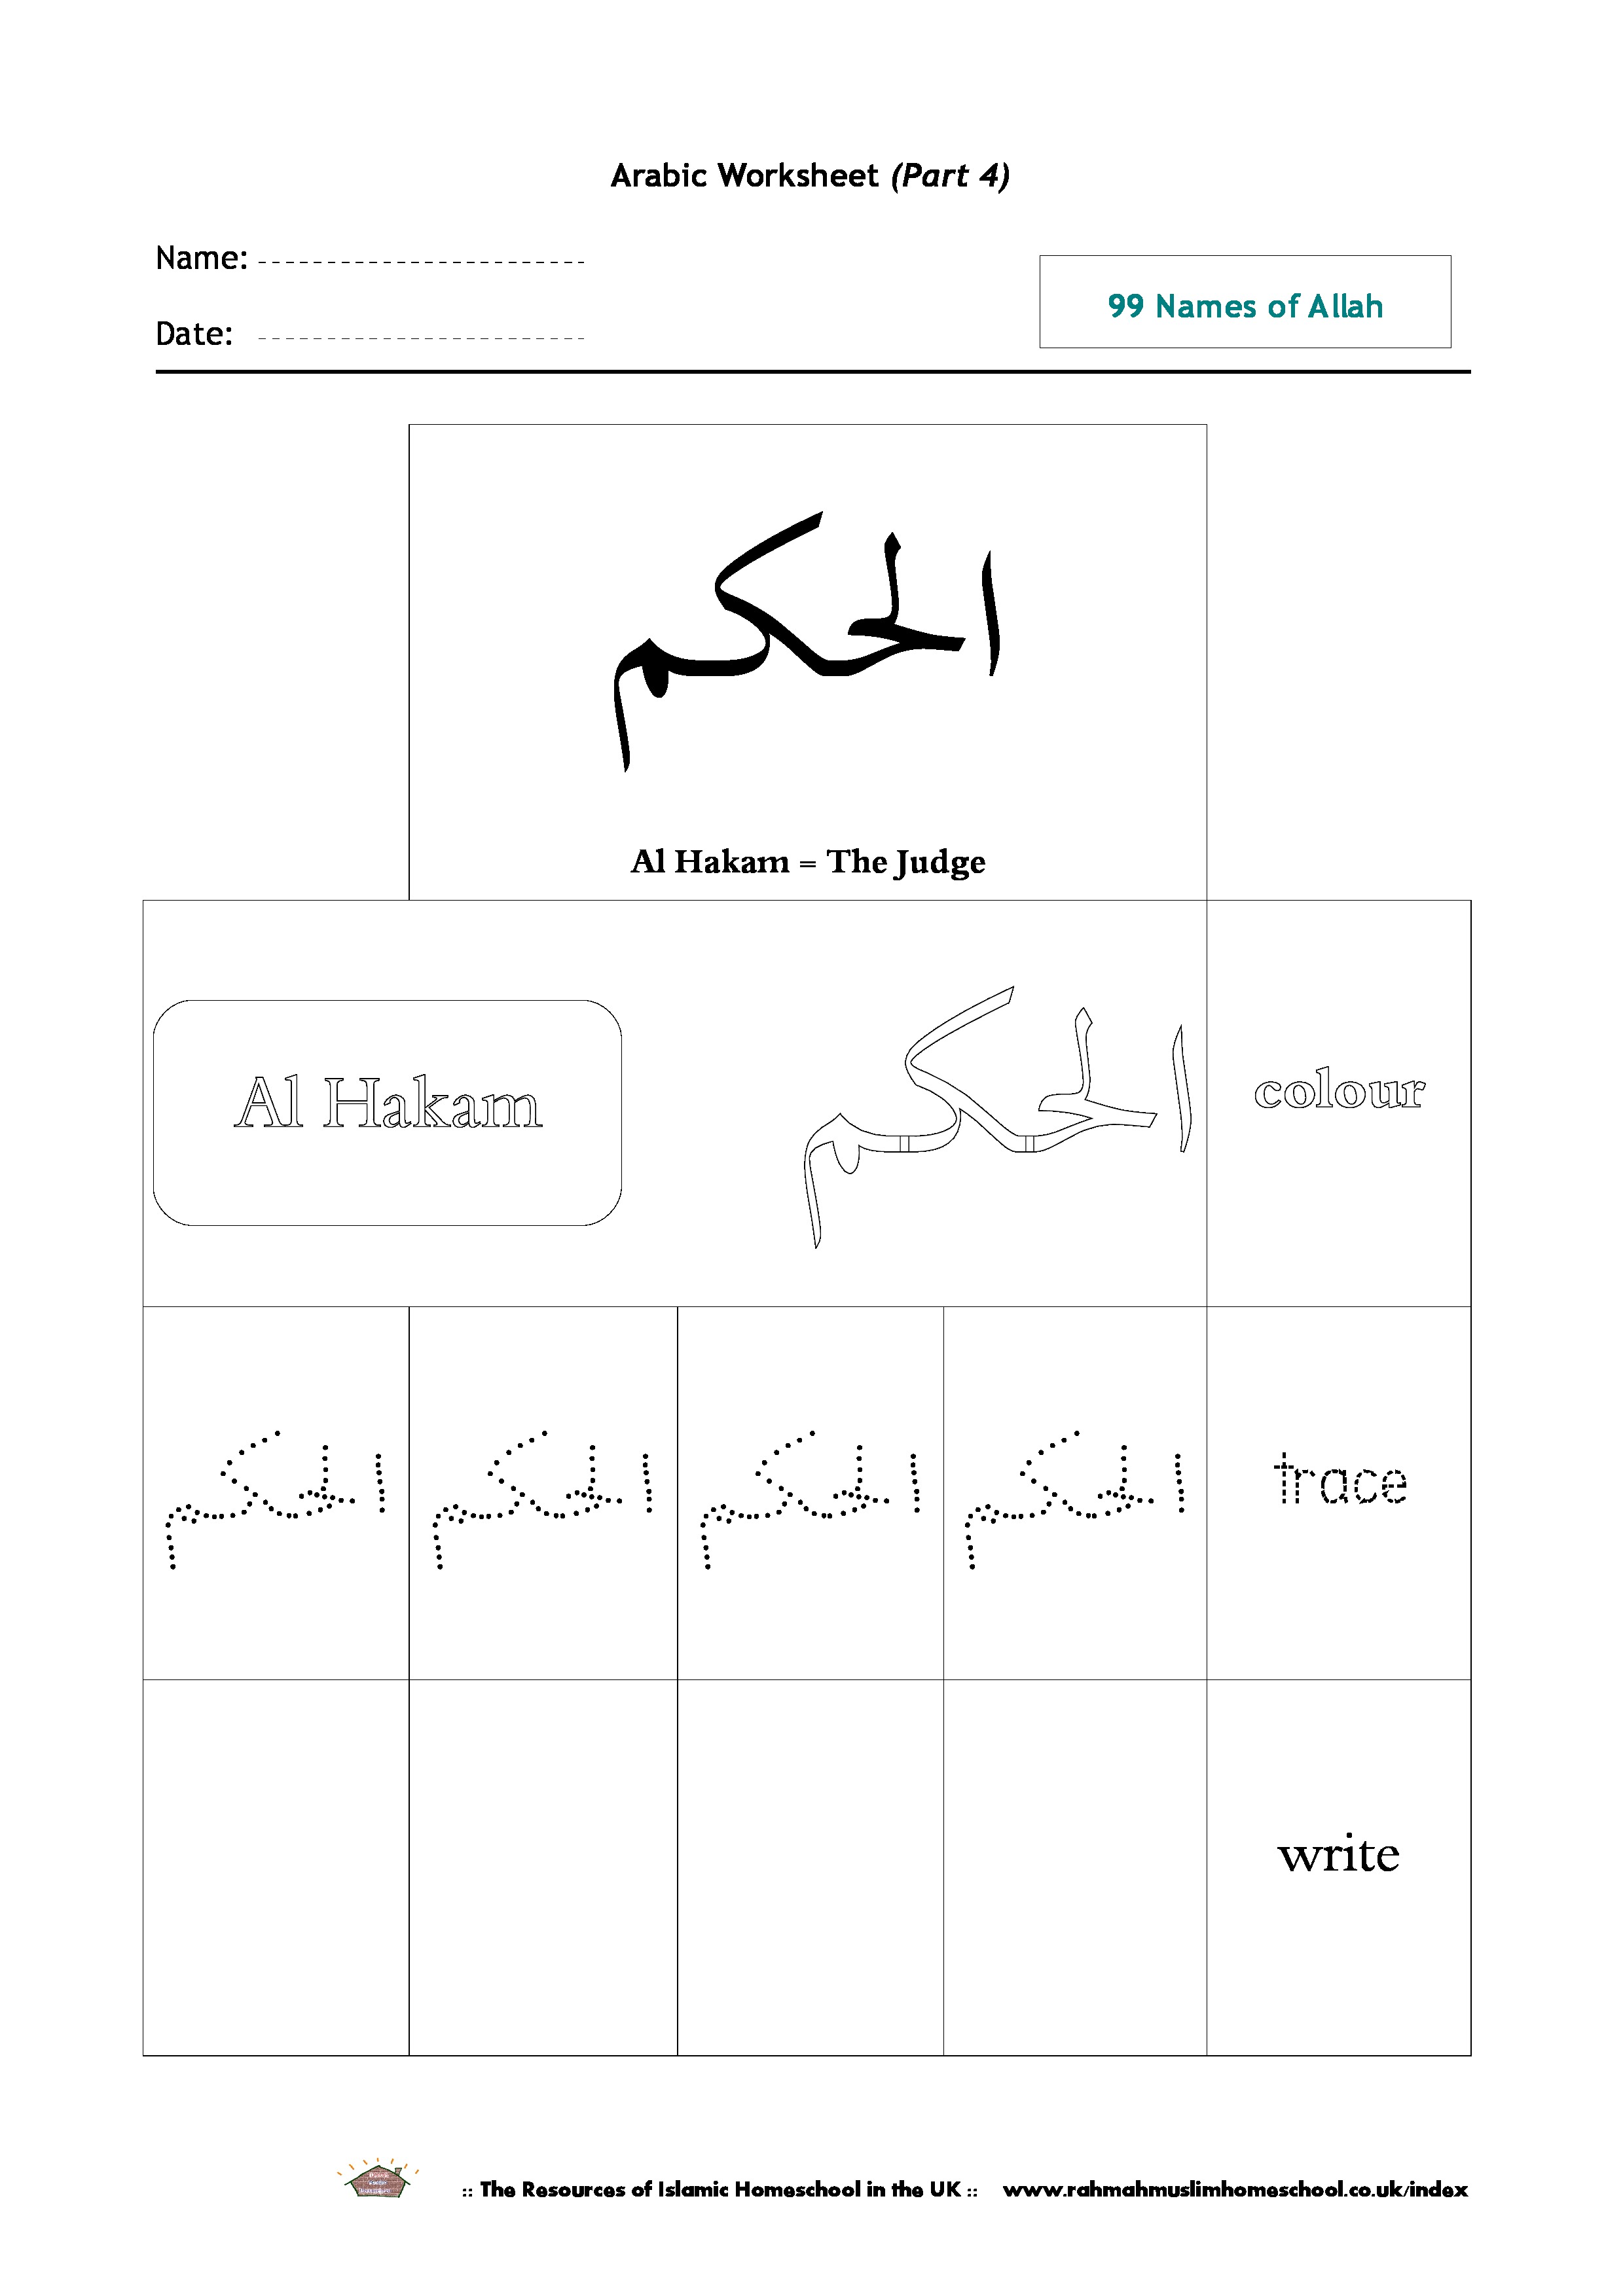 Arabic Worksheets | The Resources of Islamic Homeschool in the UK